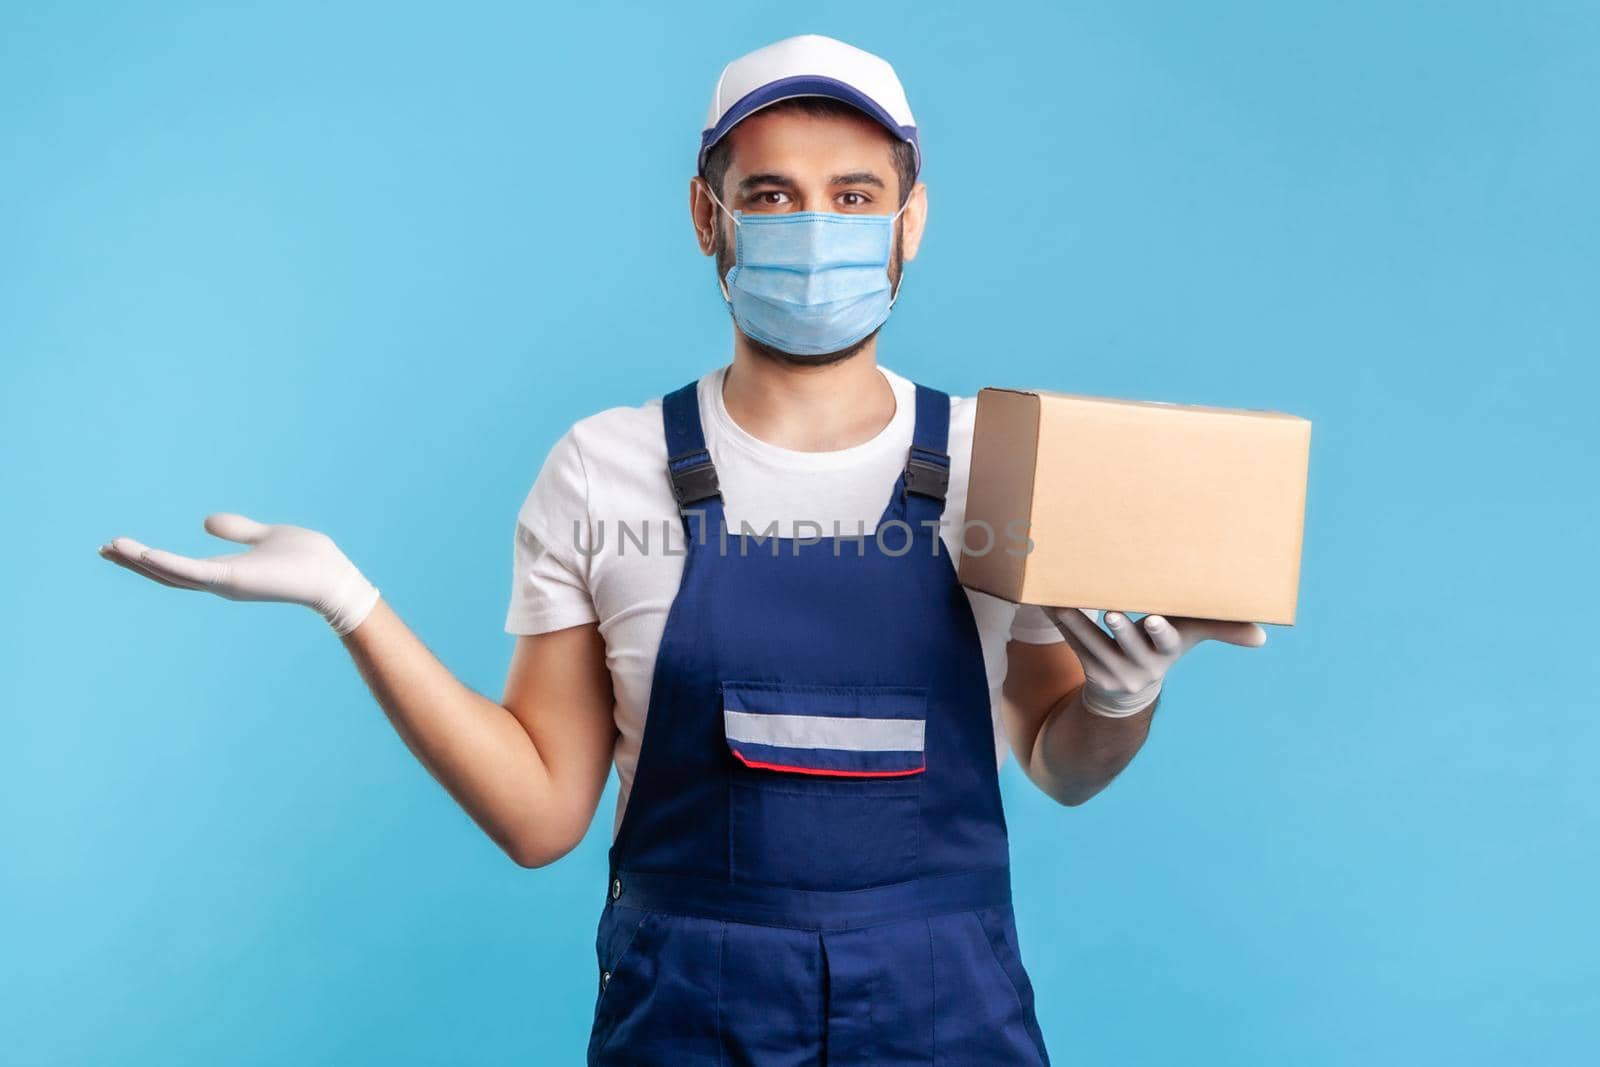 worker in uniform and mask carrying cardboard box and raising other hand to hold empty space, advertising area for commercial image. Concept of cargo transportation, delivery service, express shipping